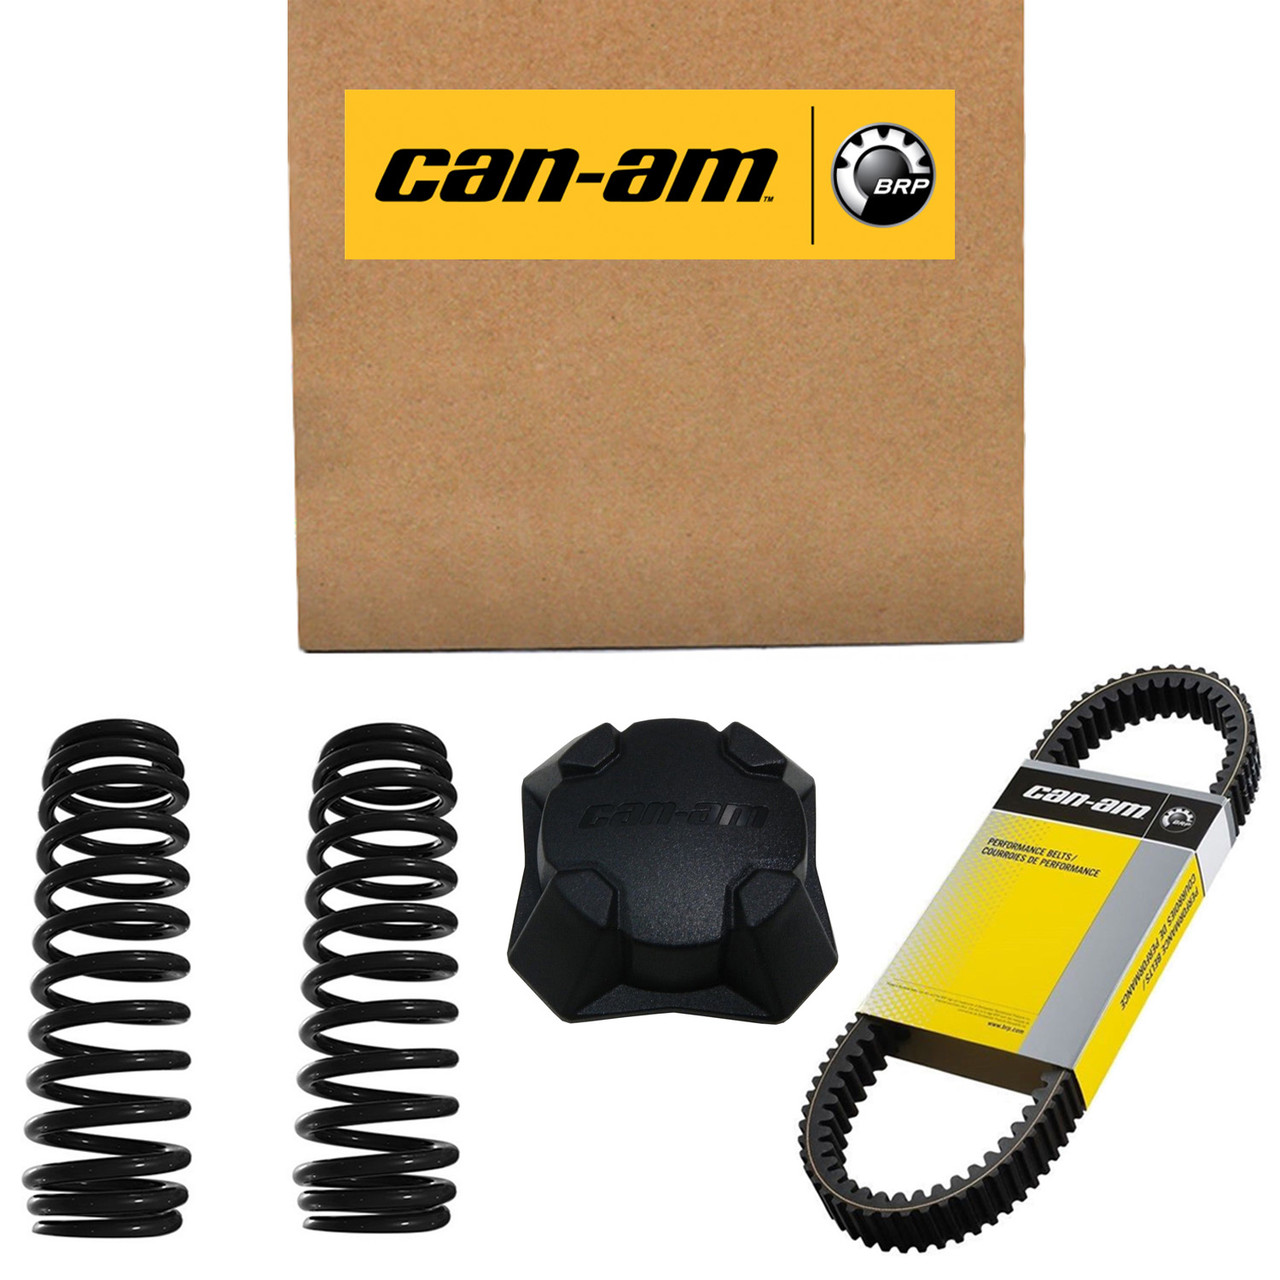 Can-Am New OEM Electronic Box, 420464198